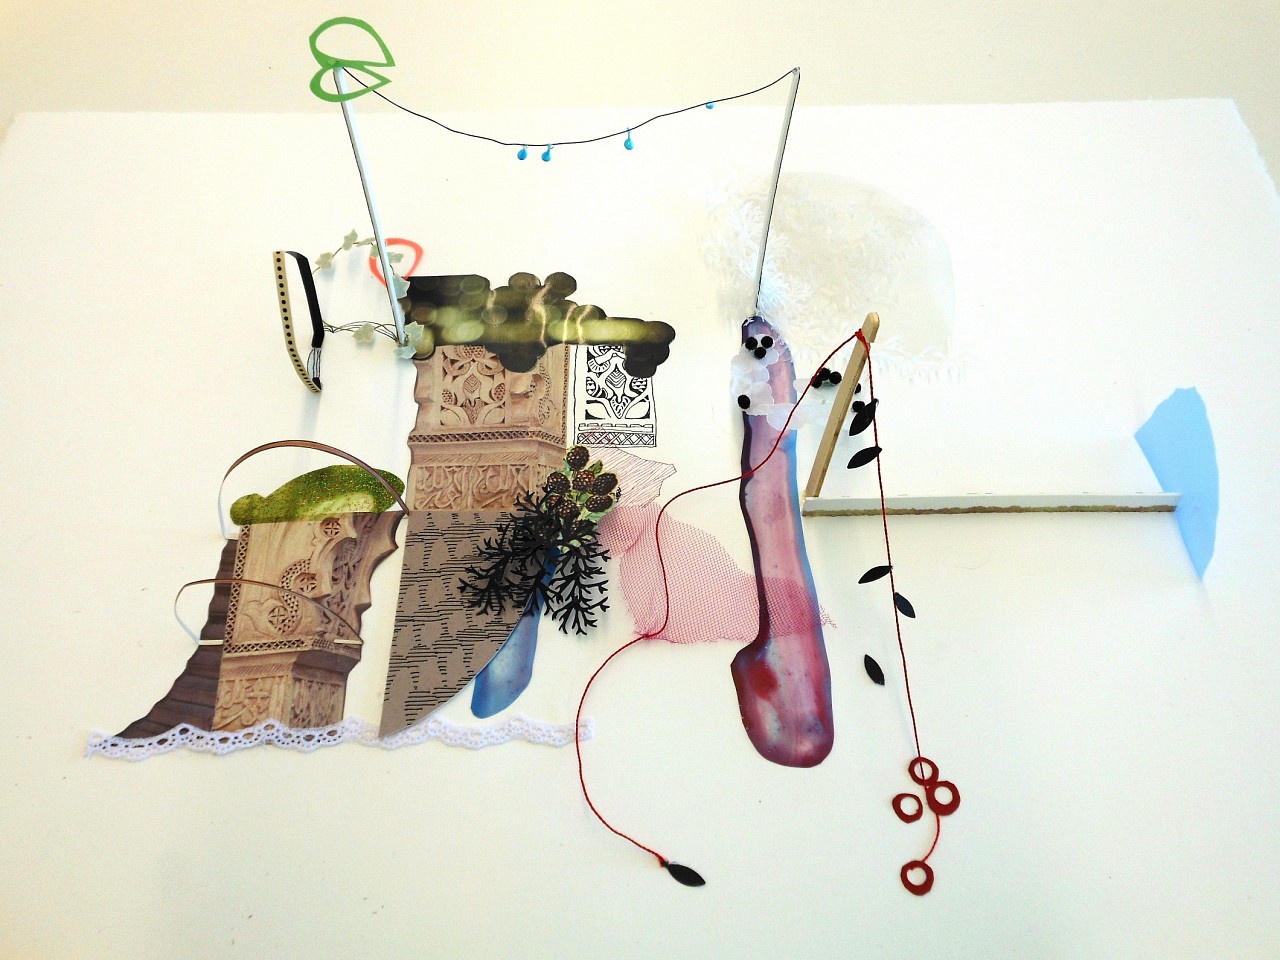 Ajean Ryan
If Still Standing, 2013
mixed media on paper, 26 x 19 x 7 in.